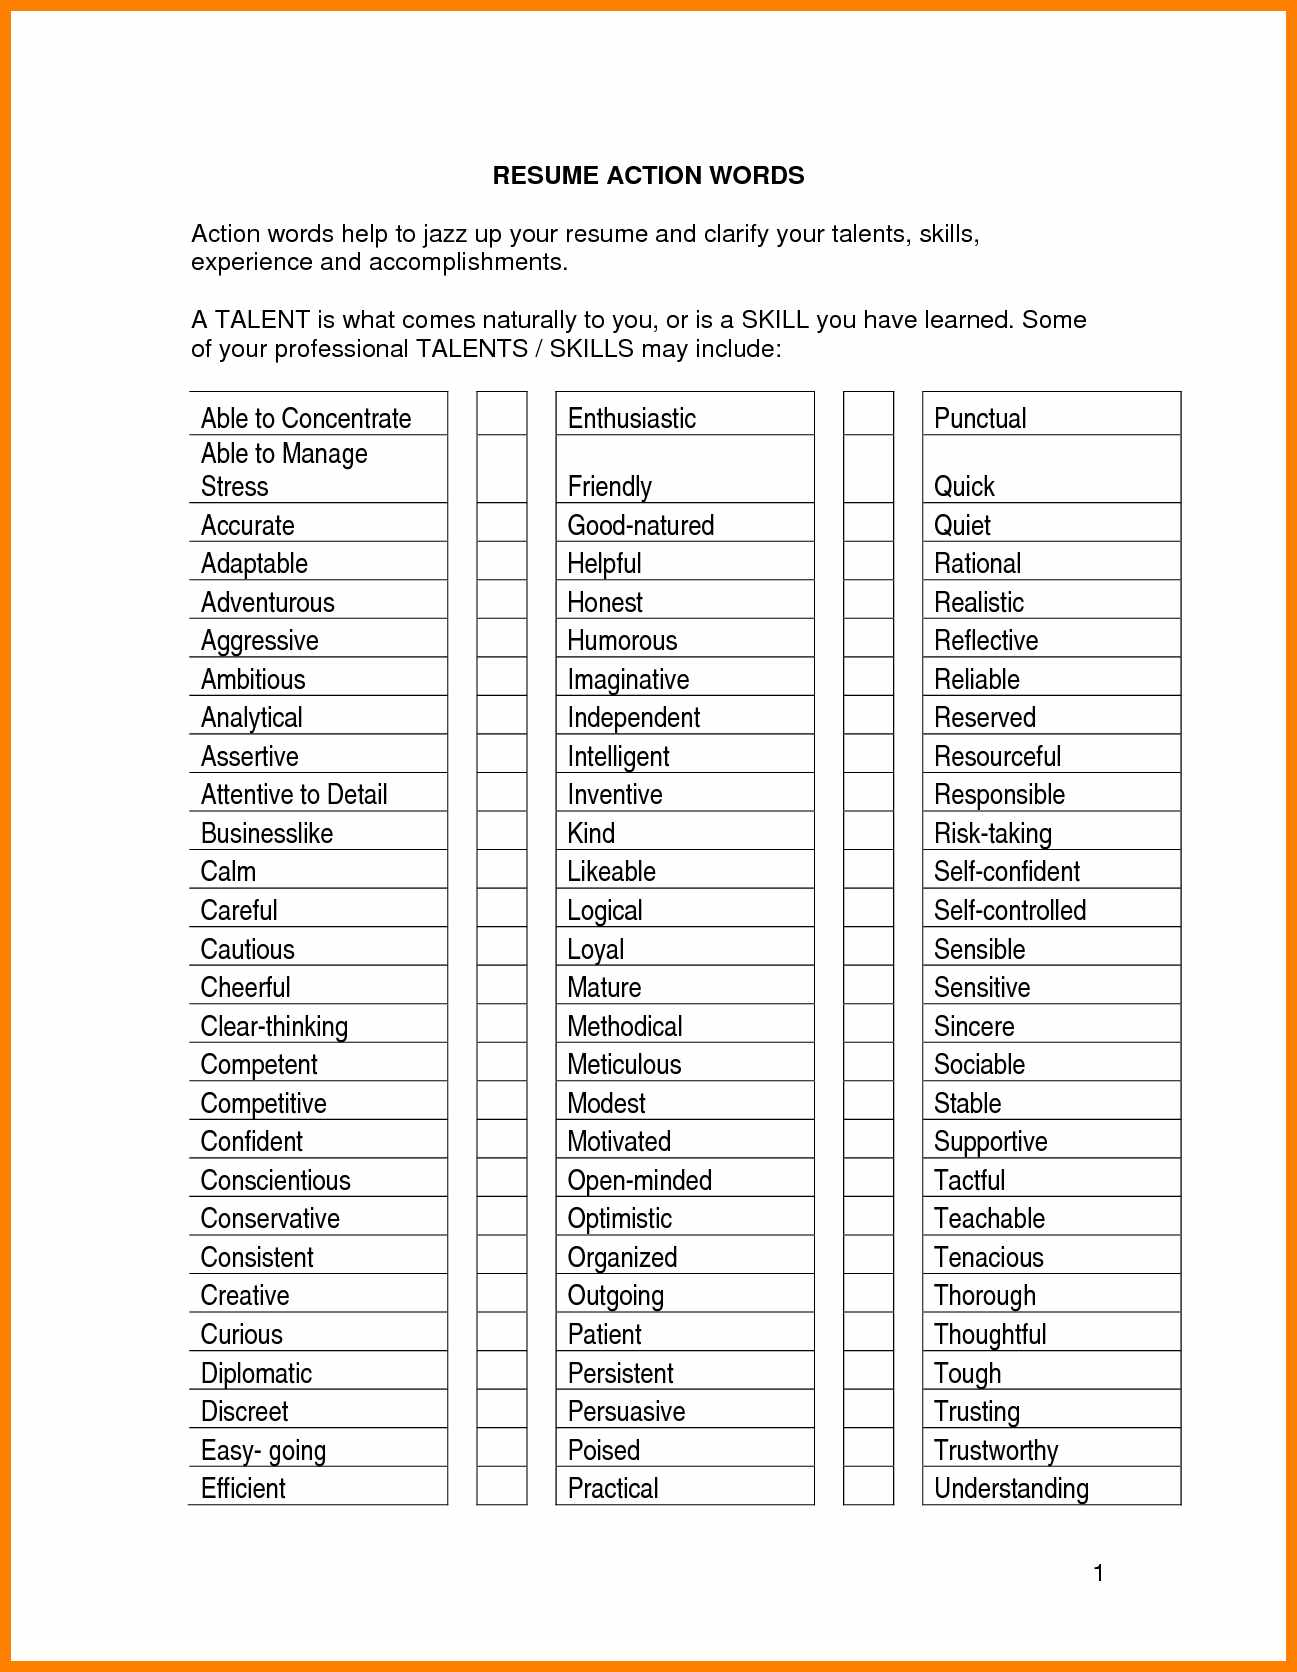 Resume Action Words  Resumes Amazing For Skills Gallerypress Themes Ideas Buzzwords